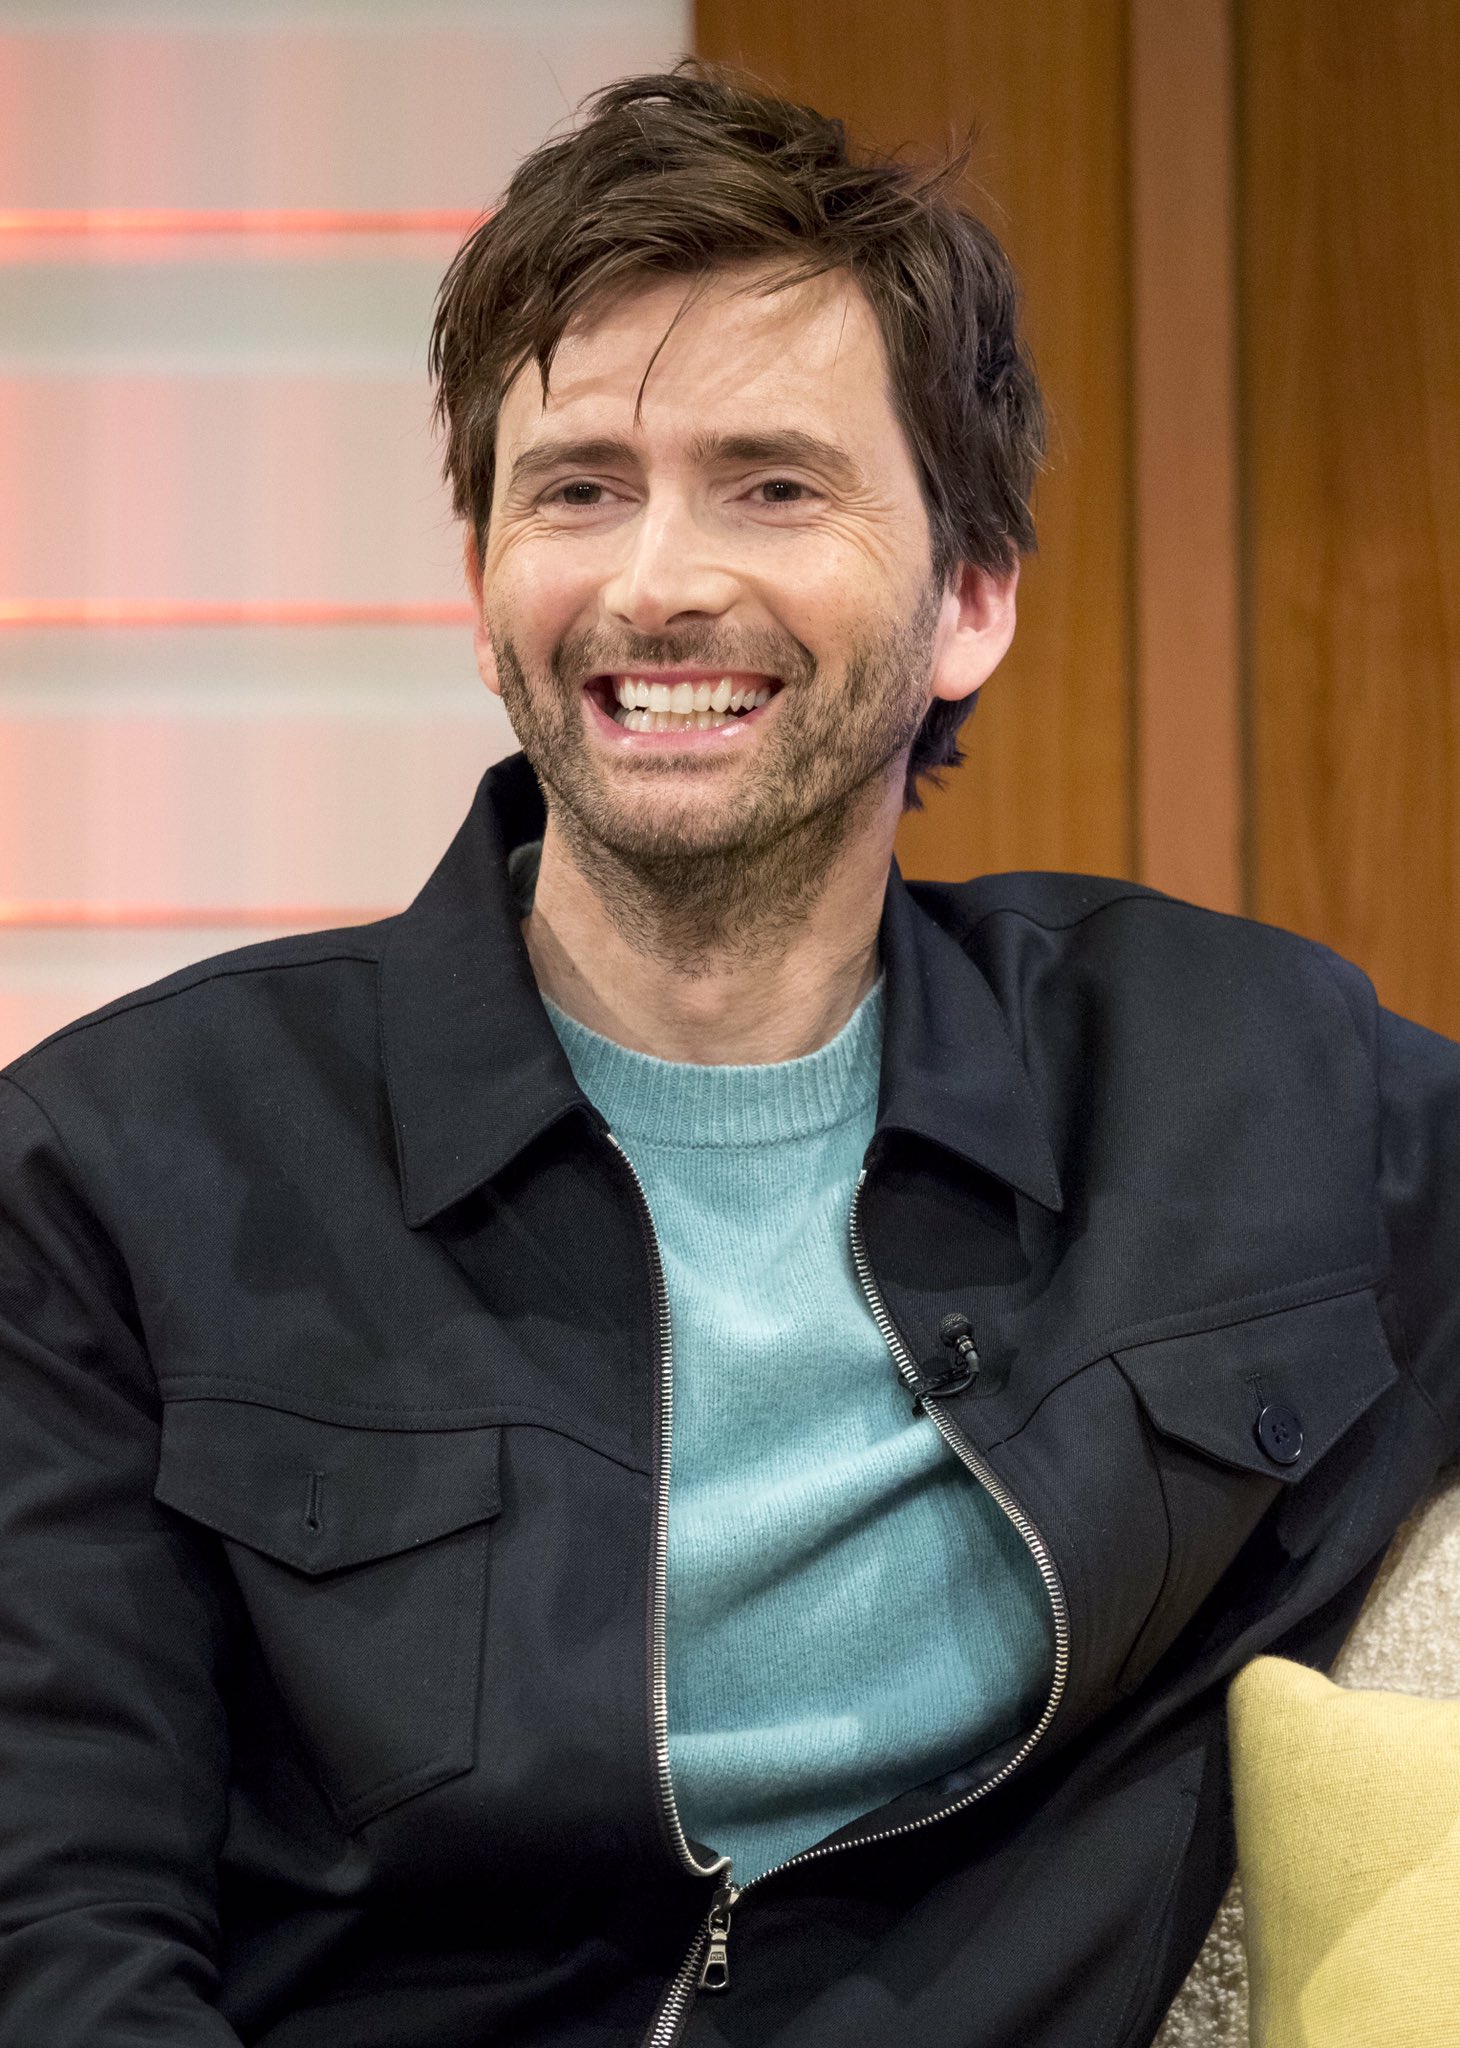 HAPPY BIRTHDAY TO MY FAVE PERSON DAVID TENNANT LOVE YOU LOTS 